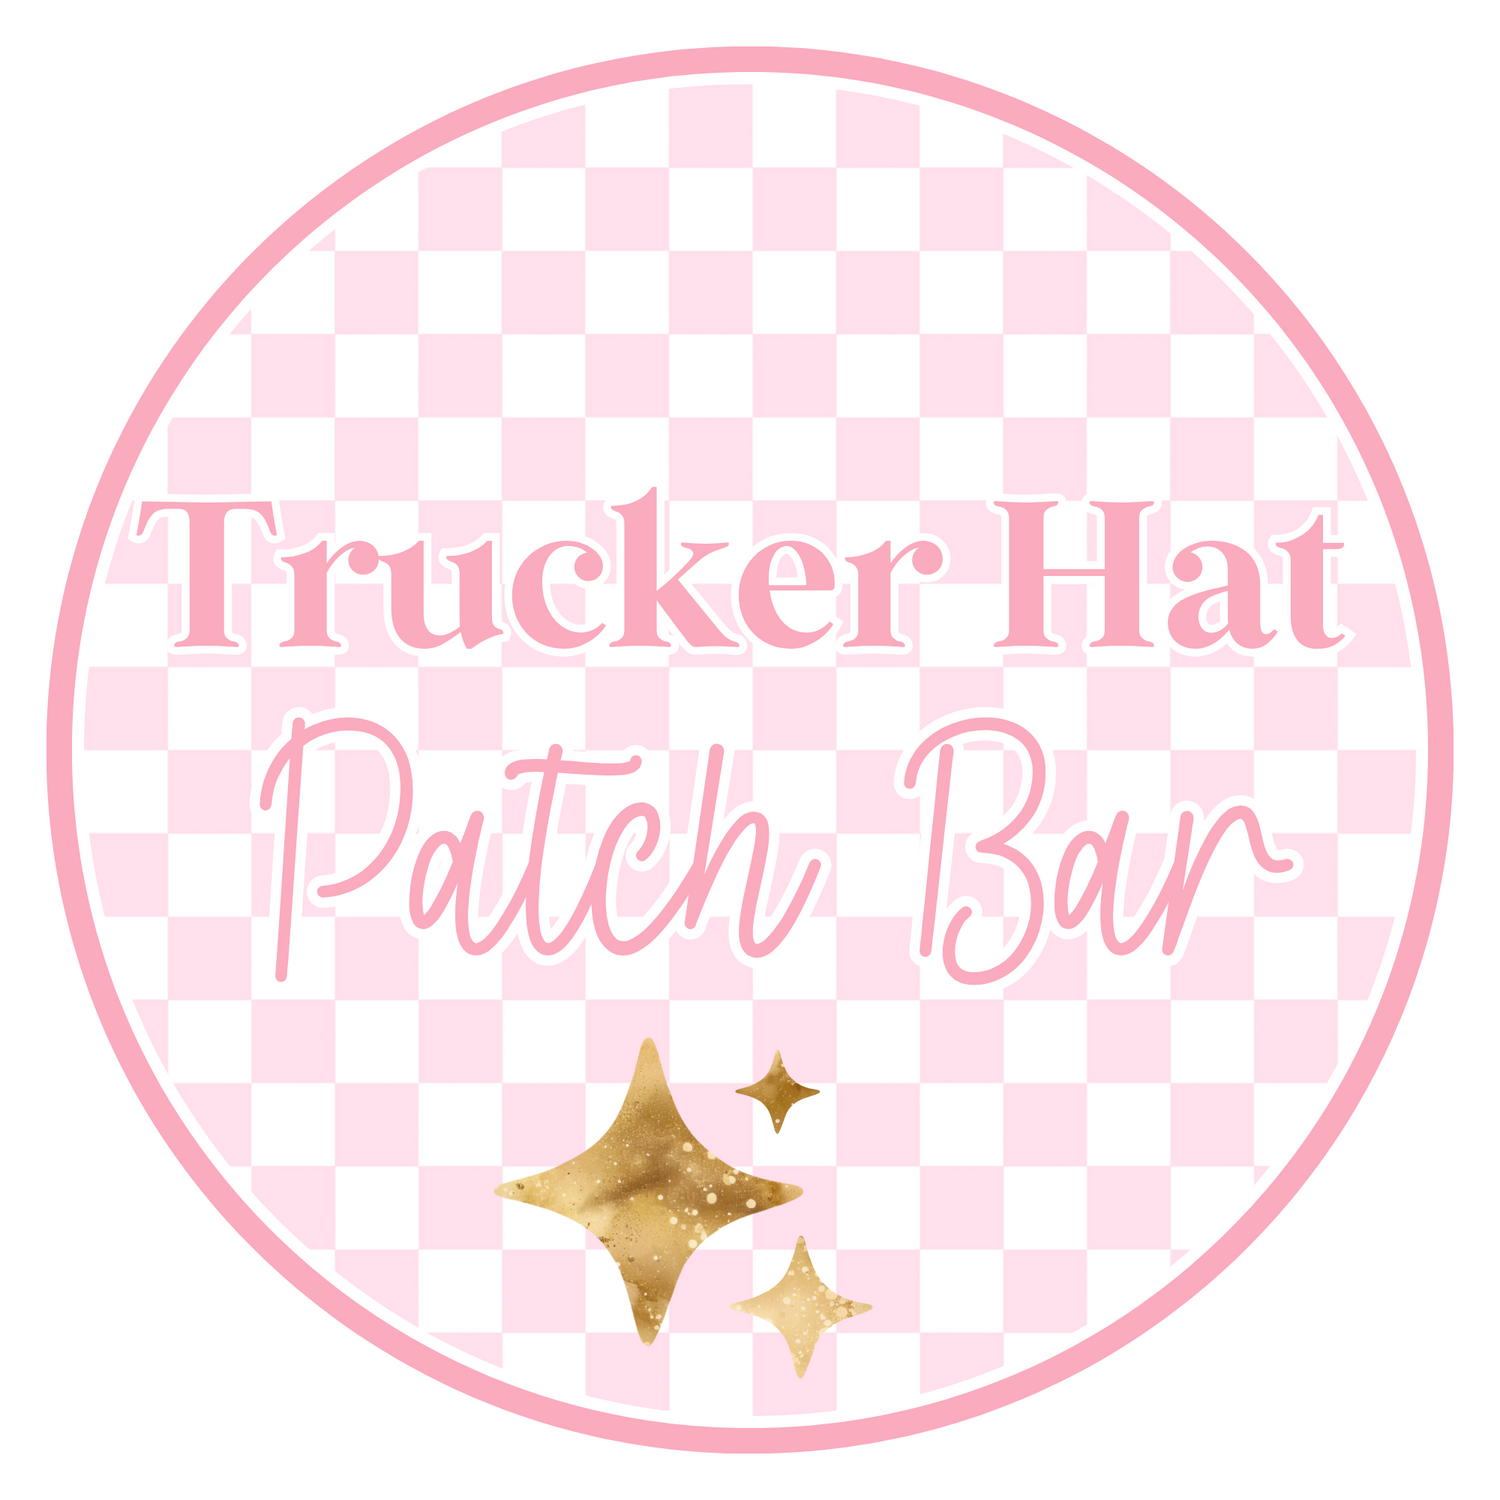 Thursday's Hat Bar Patches and Acessories